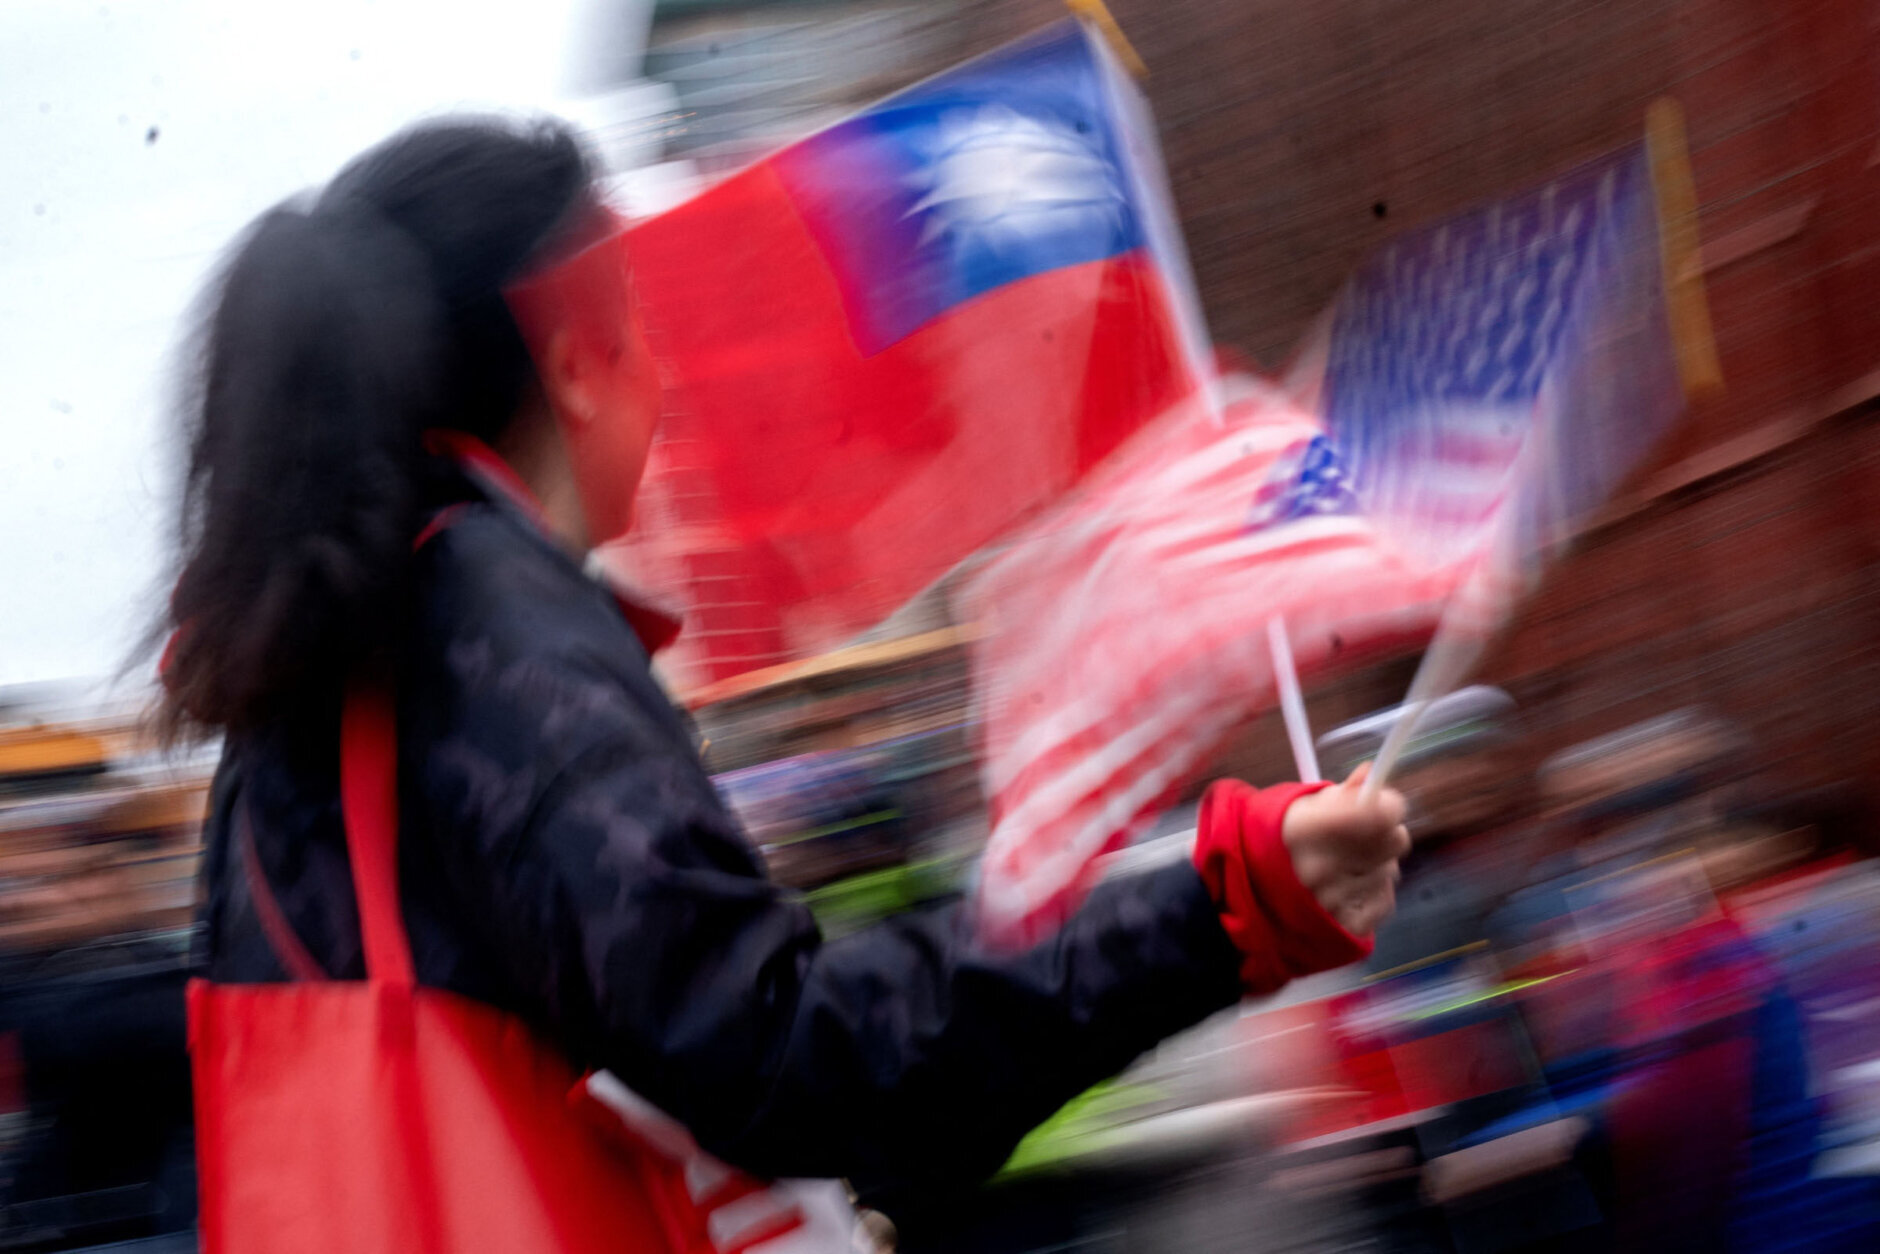 A participant waves flags from the US and Taiwan during the Lunar New Year Parade in the Chinatown neighborhood of Washington, DC, on January 22, 2023. - 2023 is the year of the rabbit in the Chinese horoscope. (Photo by Stefani Reynolds / AFP) (Photo by STEFANI REYNOLDS/AFP via Getty Images)